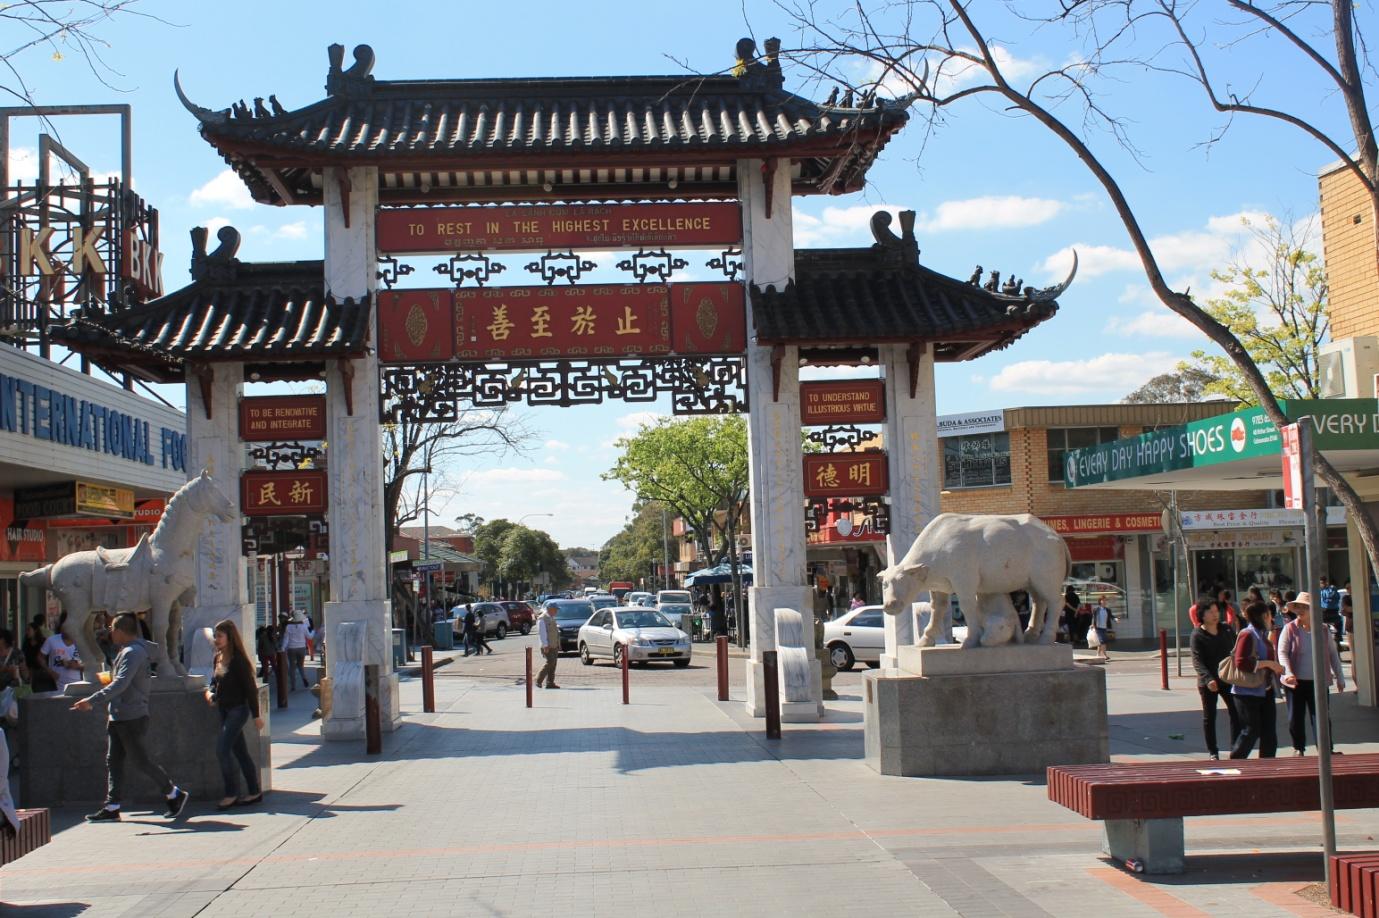 The gate to the Cabramatta park, the picture was taken on 10.9.14 with a Canon camera